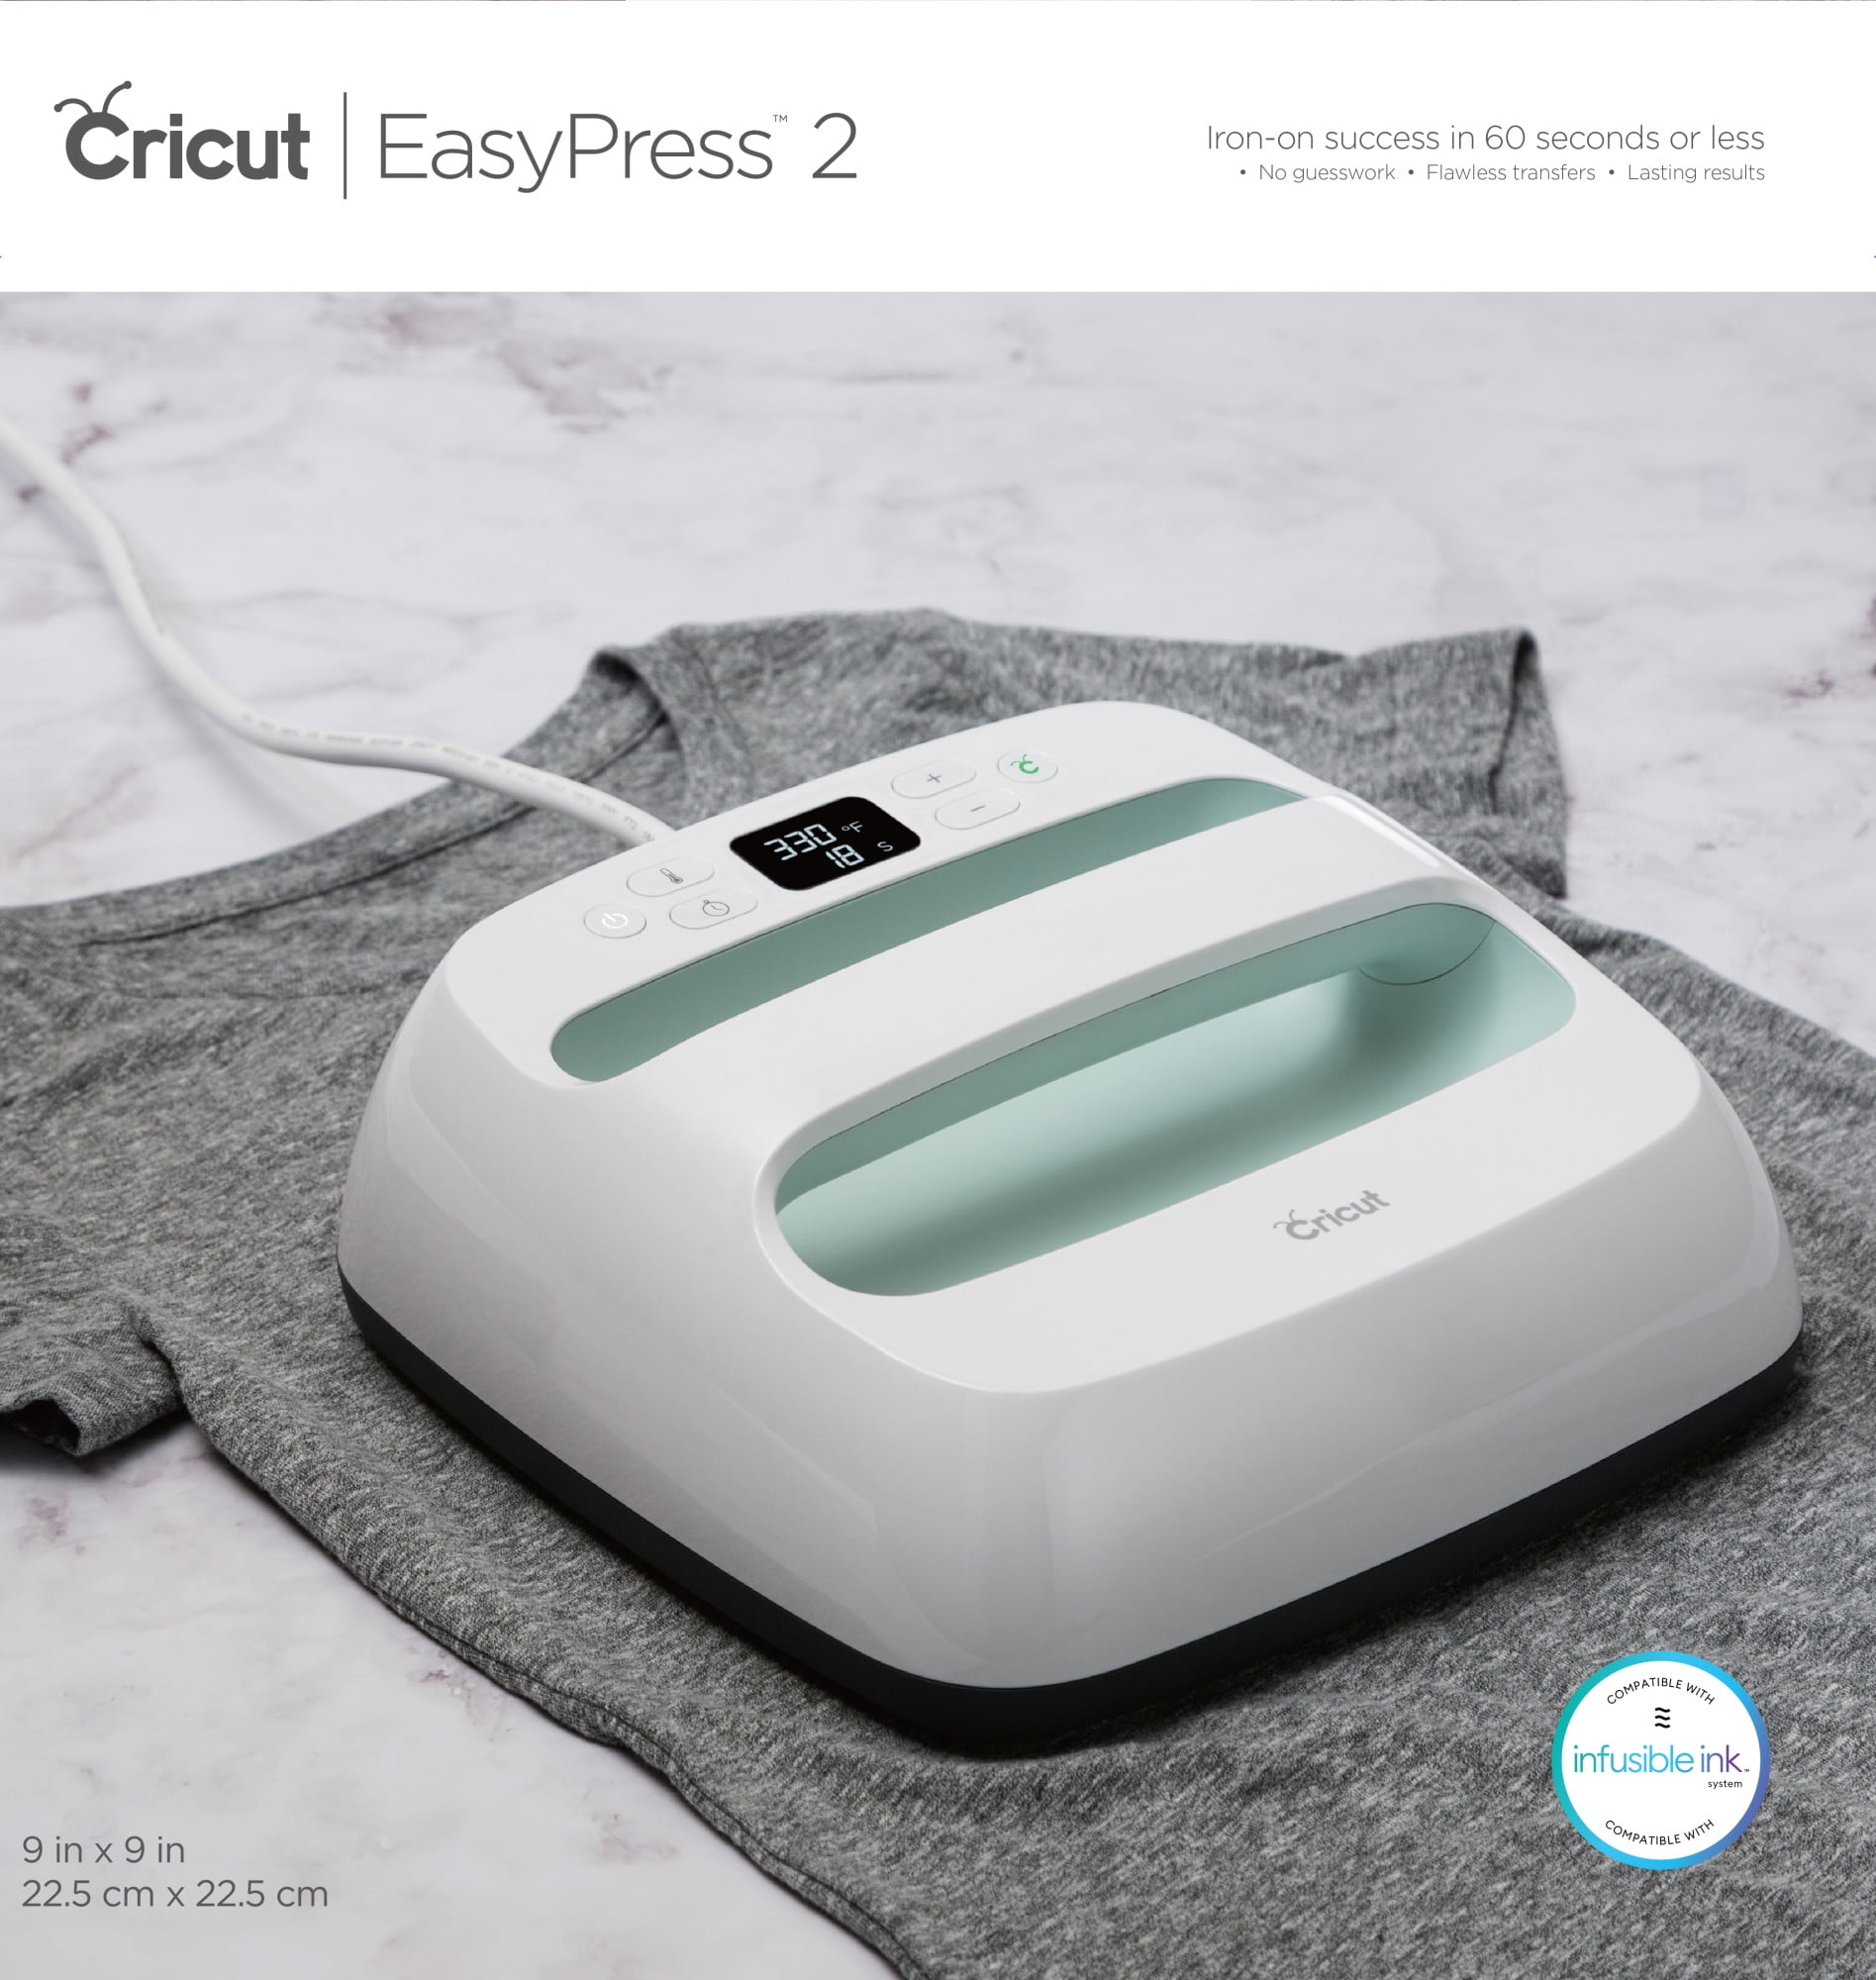 Cricut Easypress 2 Review - Do You Need One? ⋆ Dream a Little Bigger